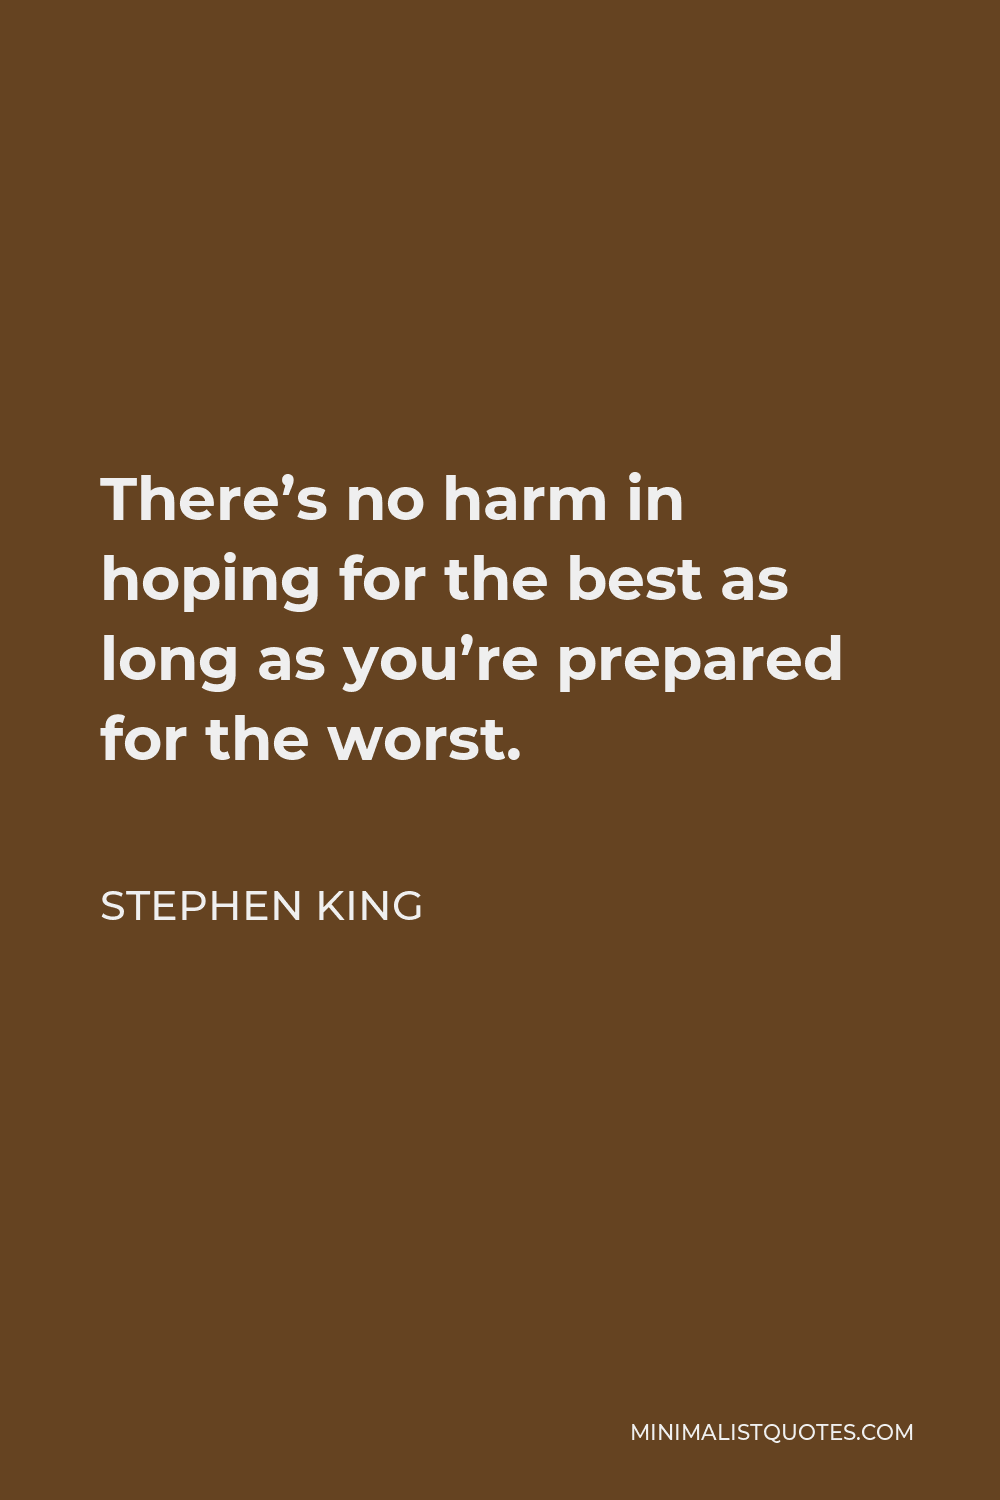 Stephen King Quote - There’s no harm in hoping for the best as long as you’re prepared for the worst.